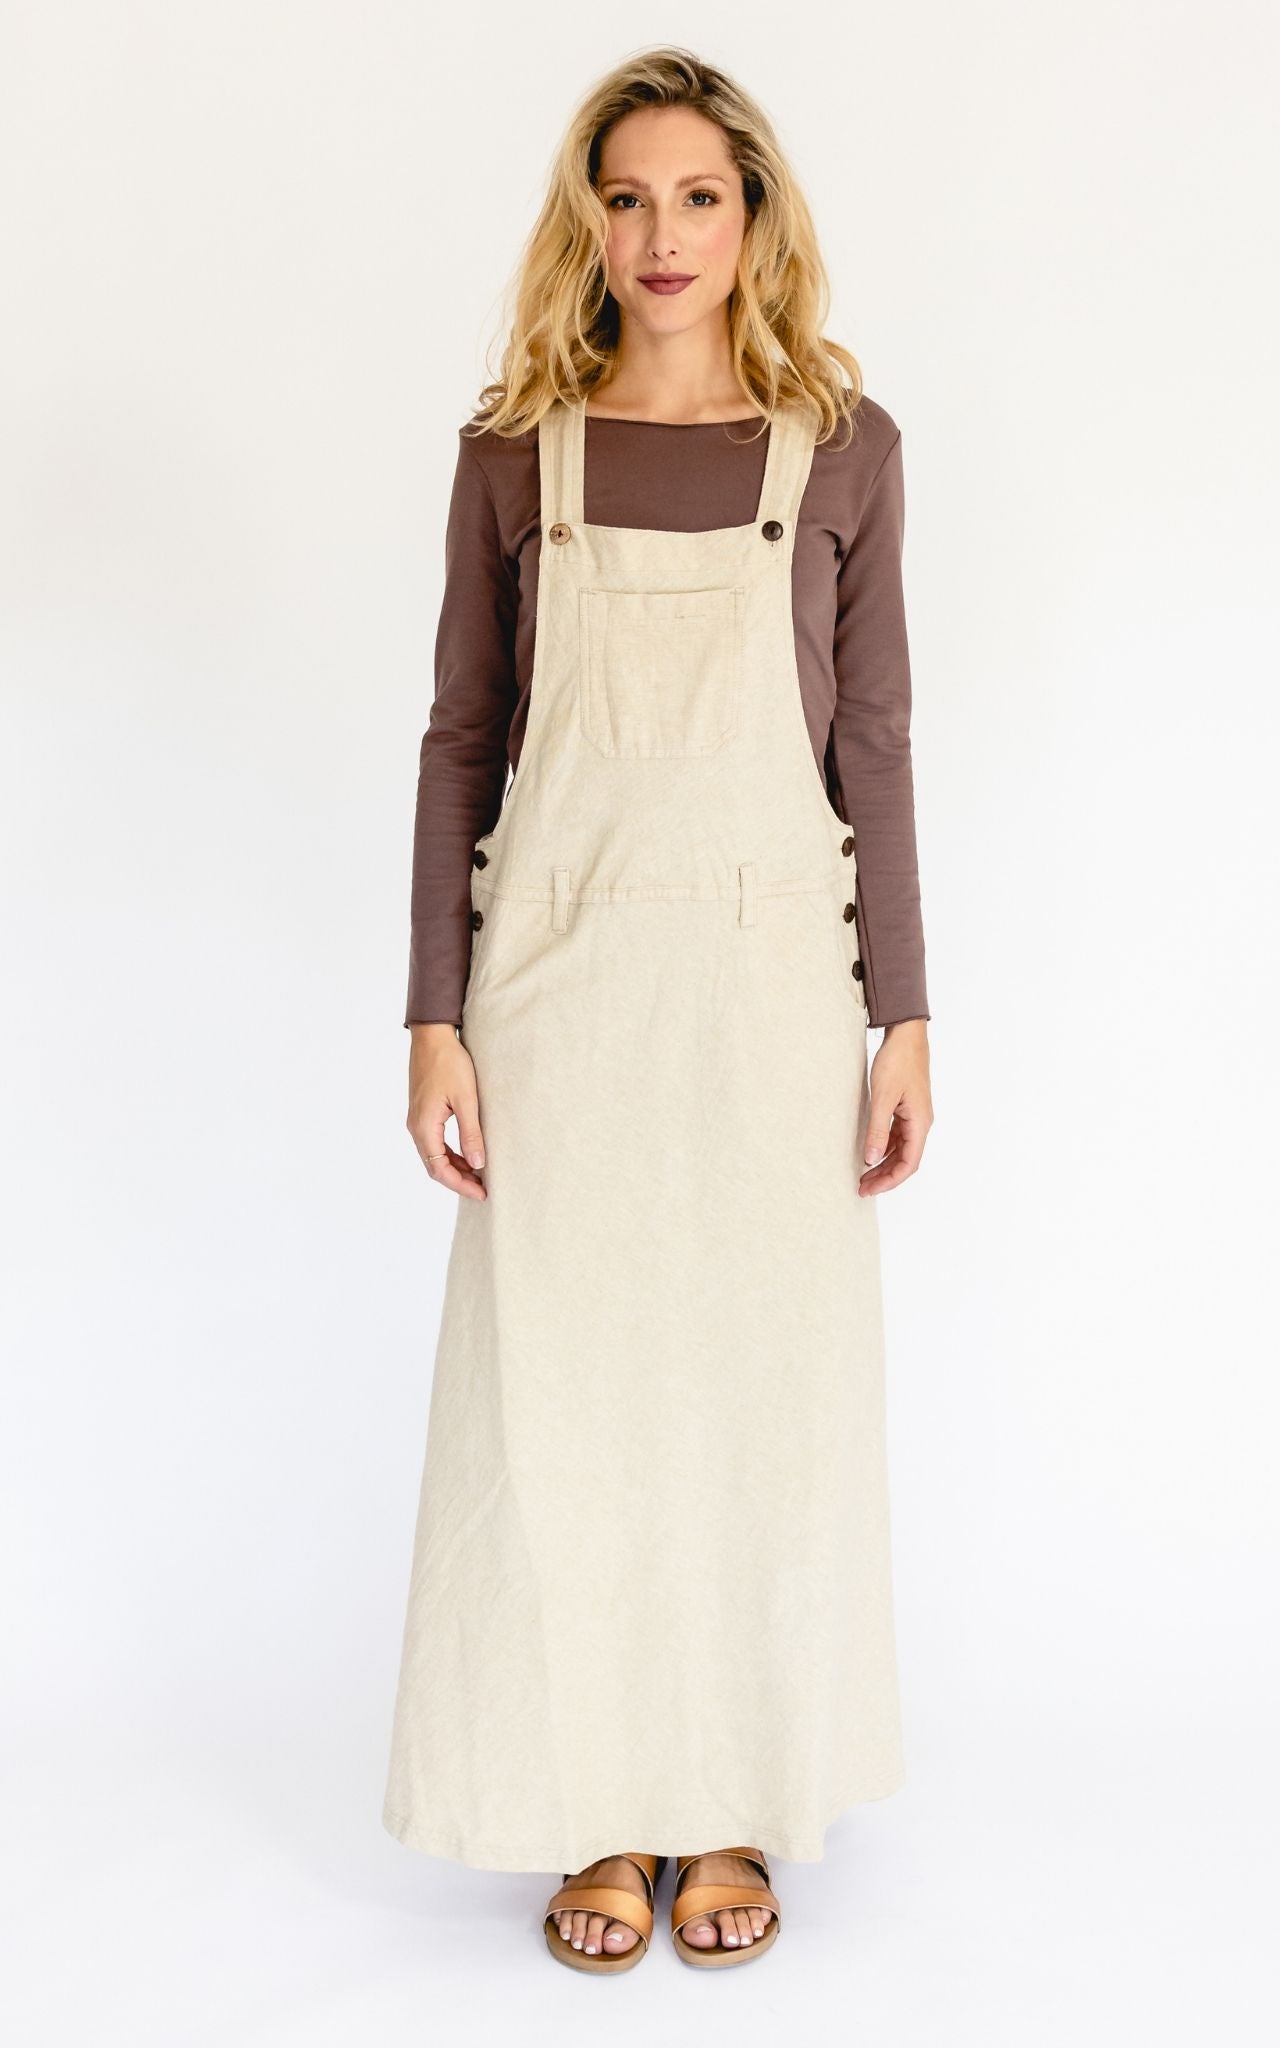 Surya Australia Ethical Cotton Overall Maxi Dress from Nepal - Oatmeal